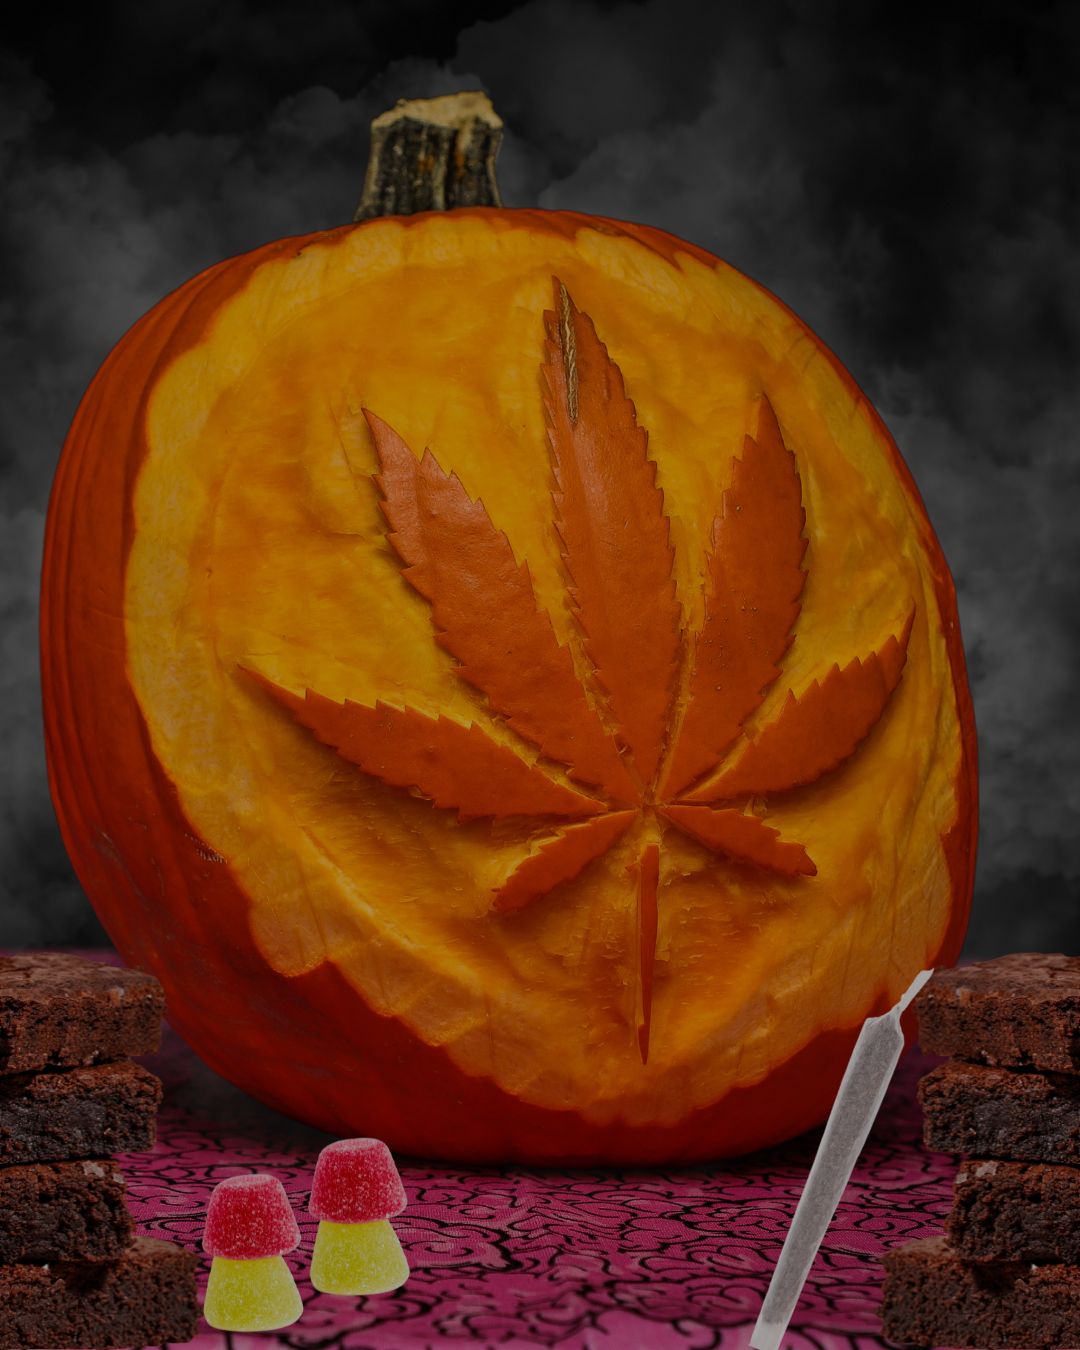 How to stay safe using cannabis on halloween